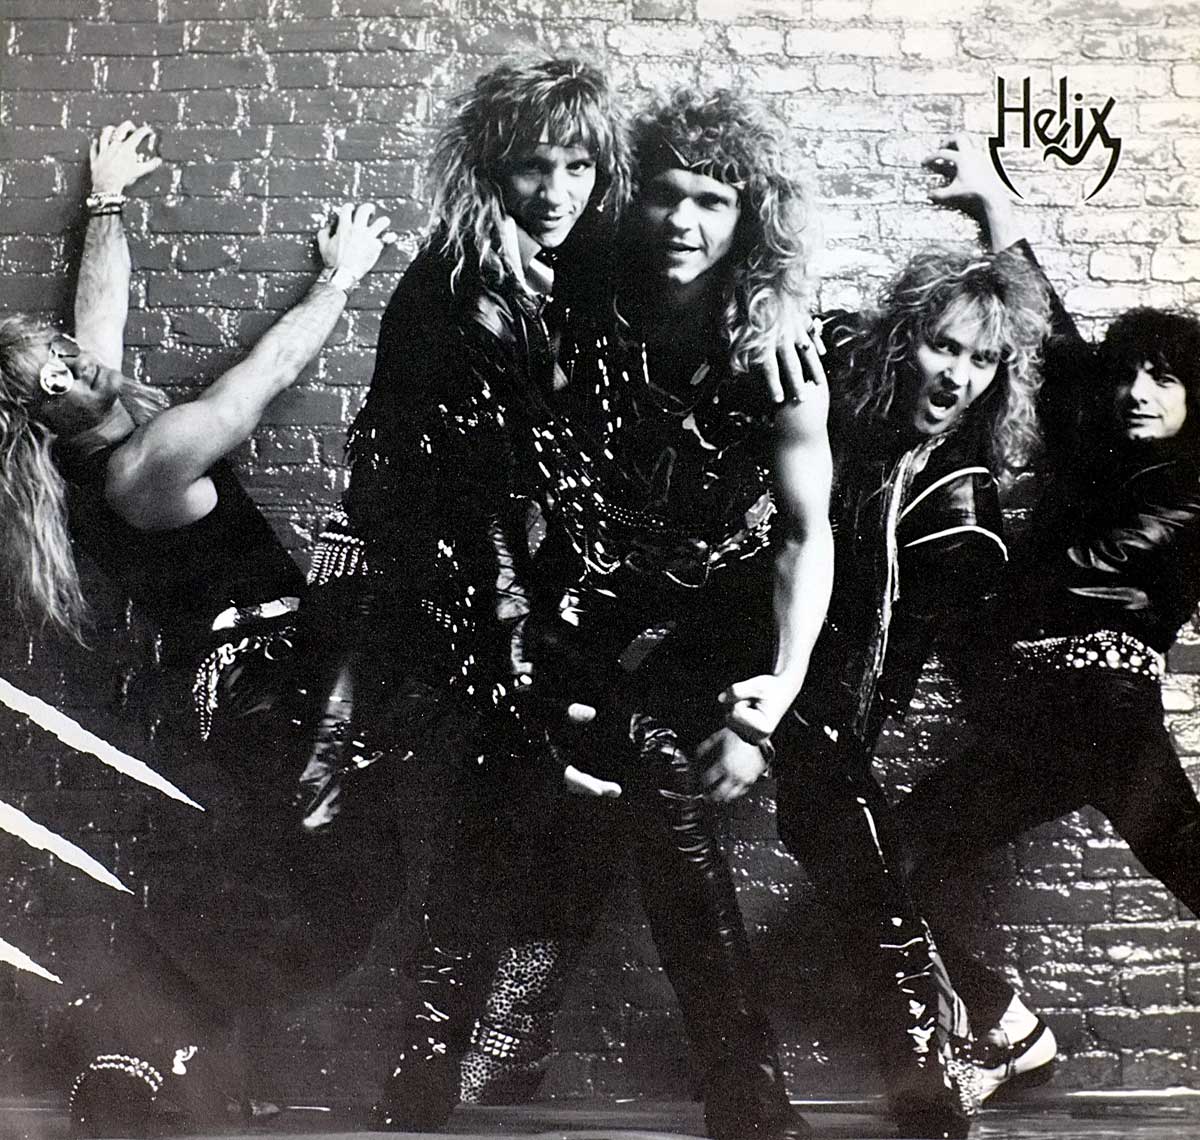 Black and White Photo of the Helix band on the Inner Sleeve   of "HELIX - Wild in the Streets" Album